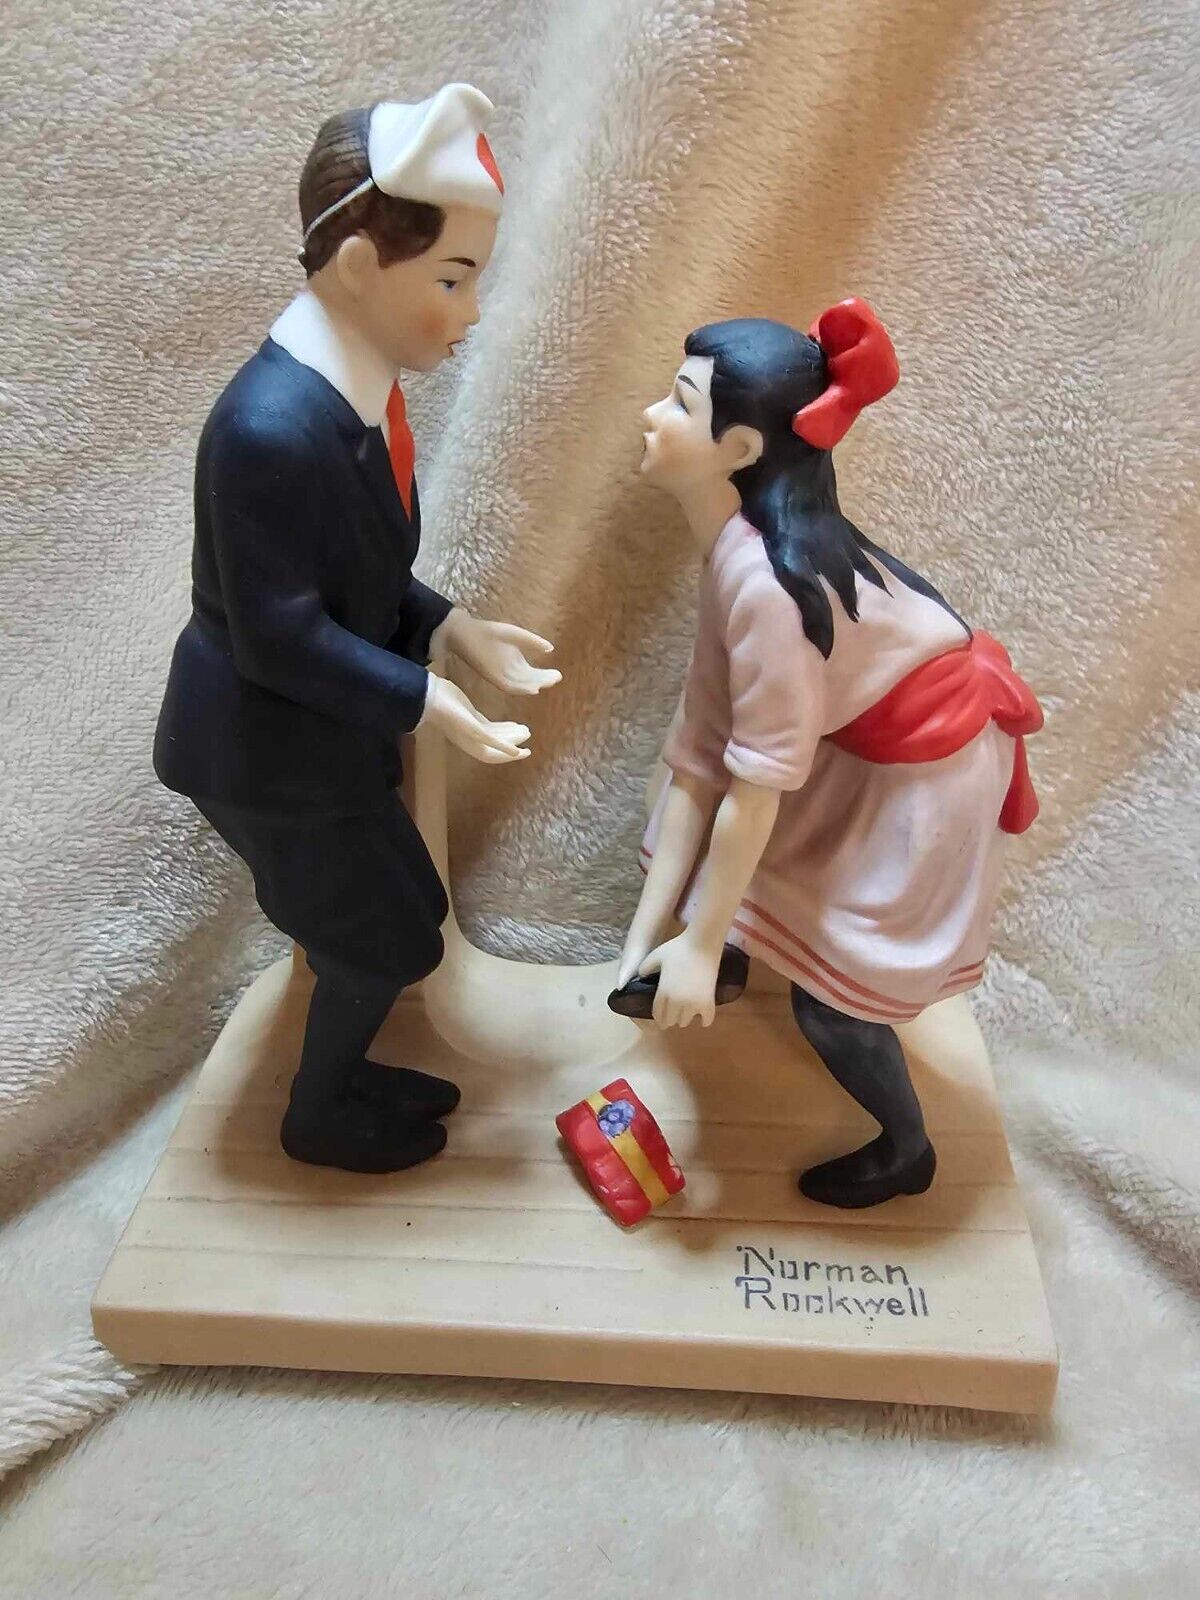 Vintage Norman Rockwell Figurine FIRST DANCE Porcelain Danbury Mint Handcrafted 